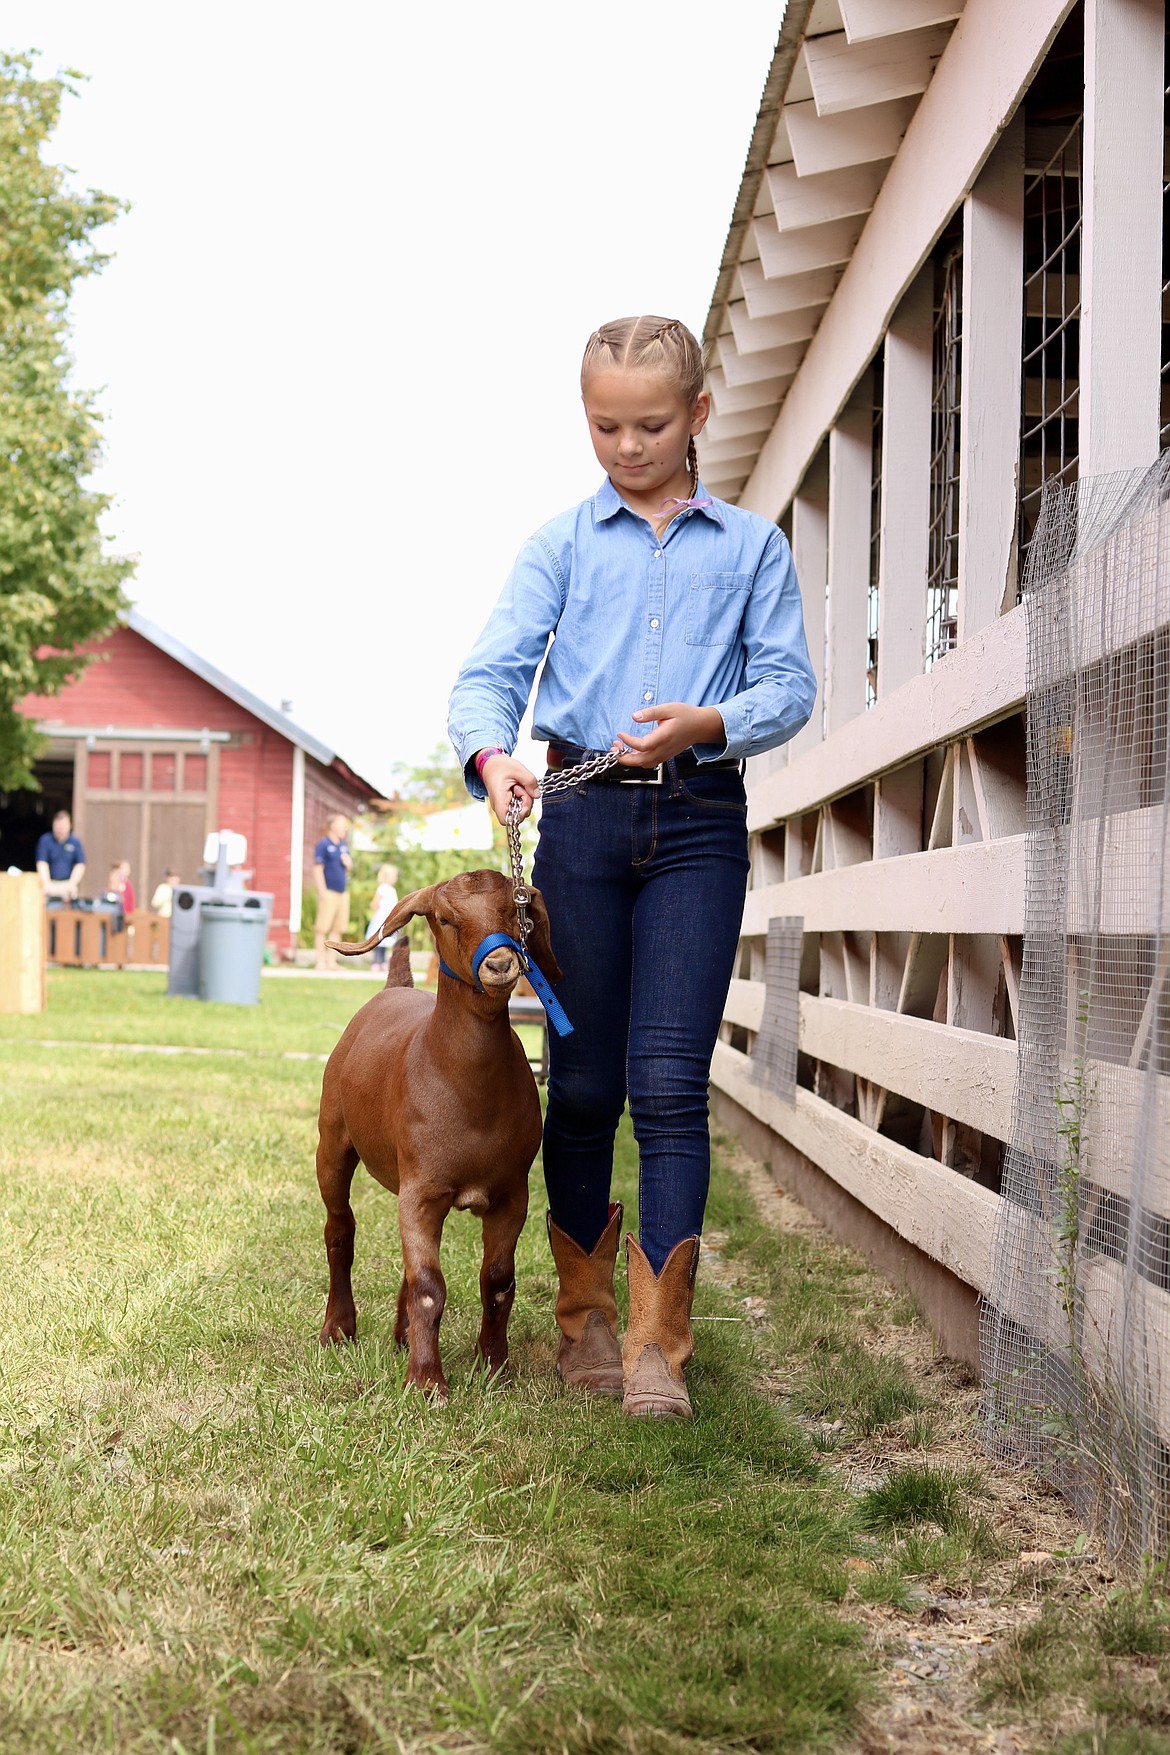 Jersey Larson, 11, walks her market goat, Darlin', to prepare for the market goat show on Saturday morning at the North Idaho State Fair. Larson has been participating in 4-H for four years. HANNAH NEFF/Press